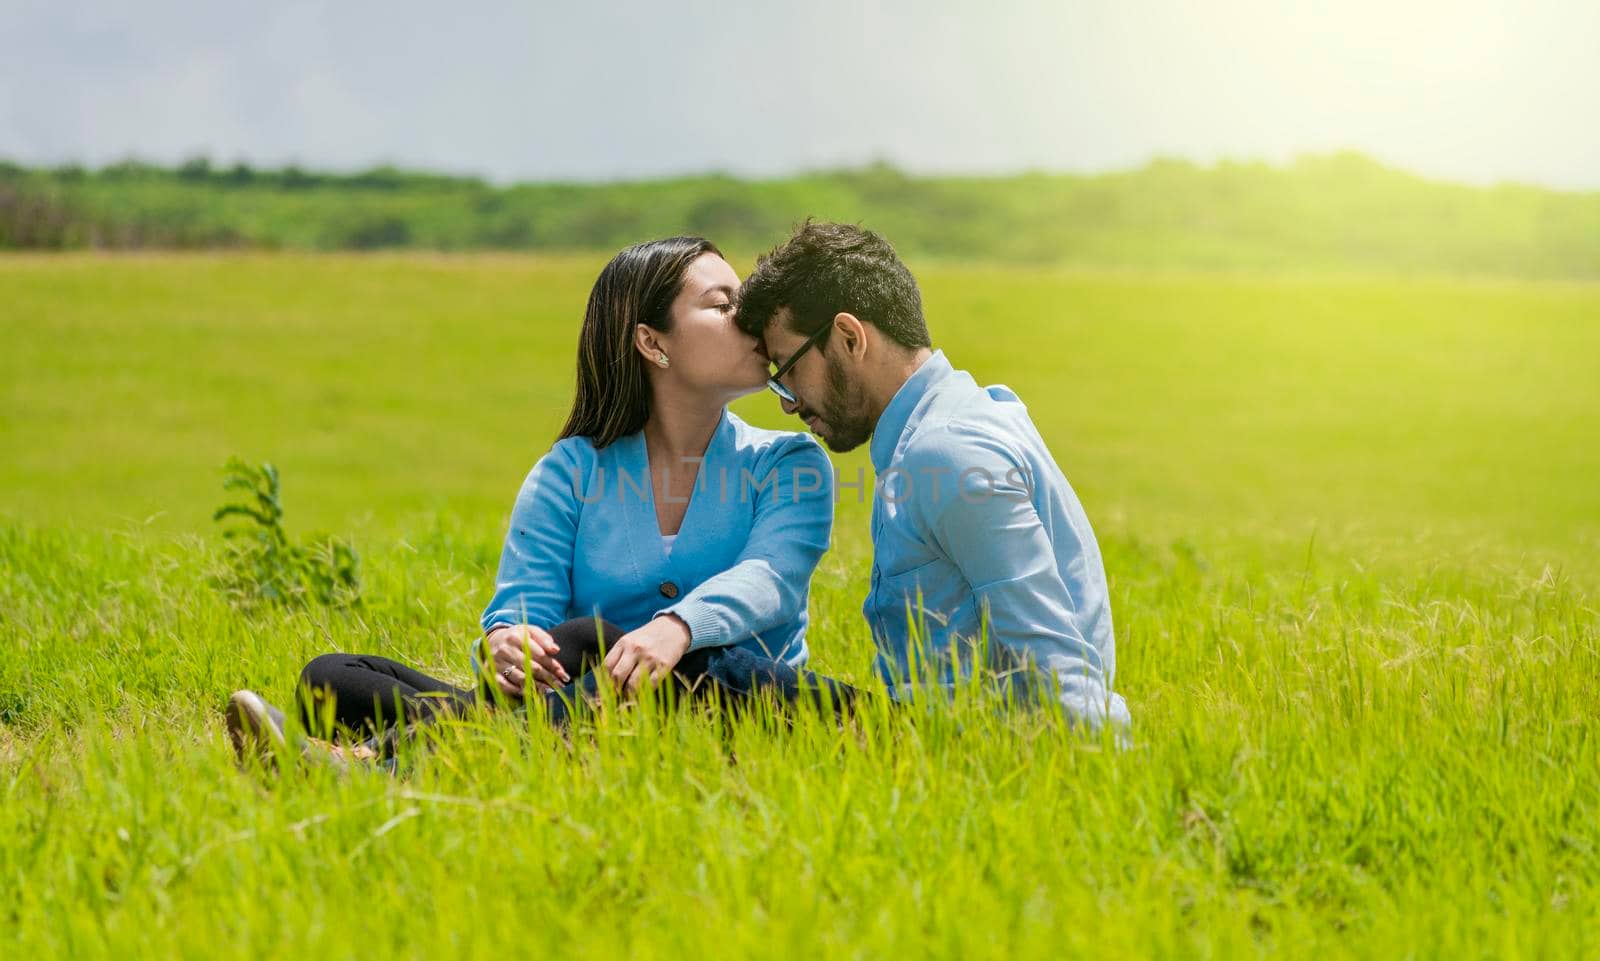 Romantic couple sitting on the grass kissing their foreheads, A pretty girl kissing her boyfriend's forehead in the field, A couple in love sitting on the field kissing their foreheads